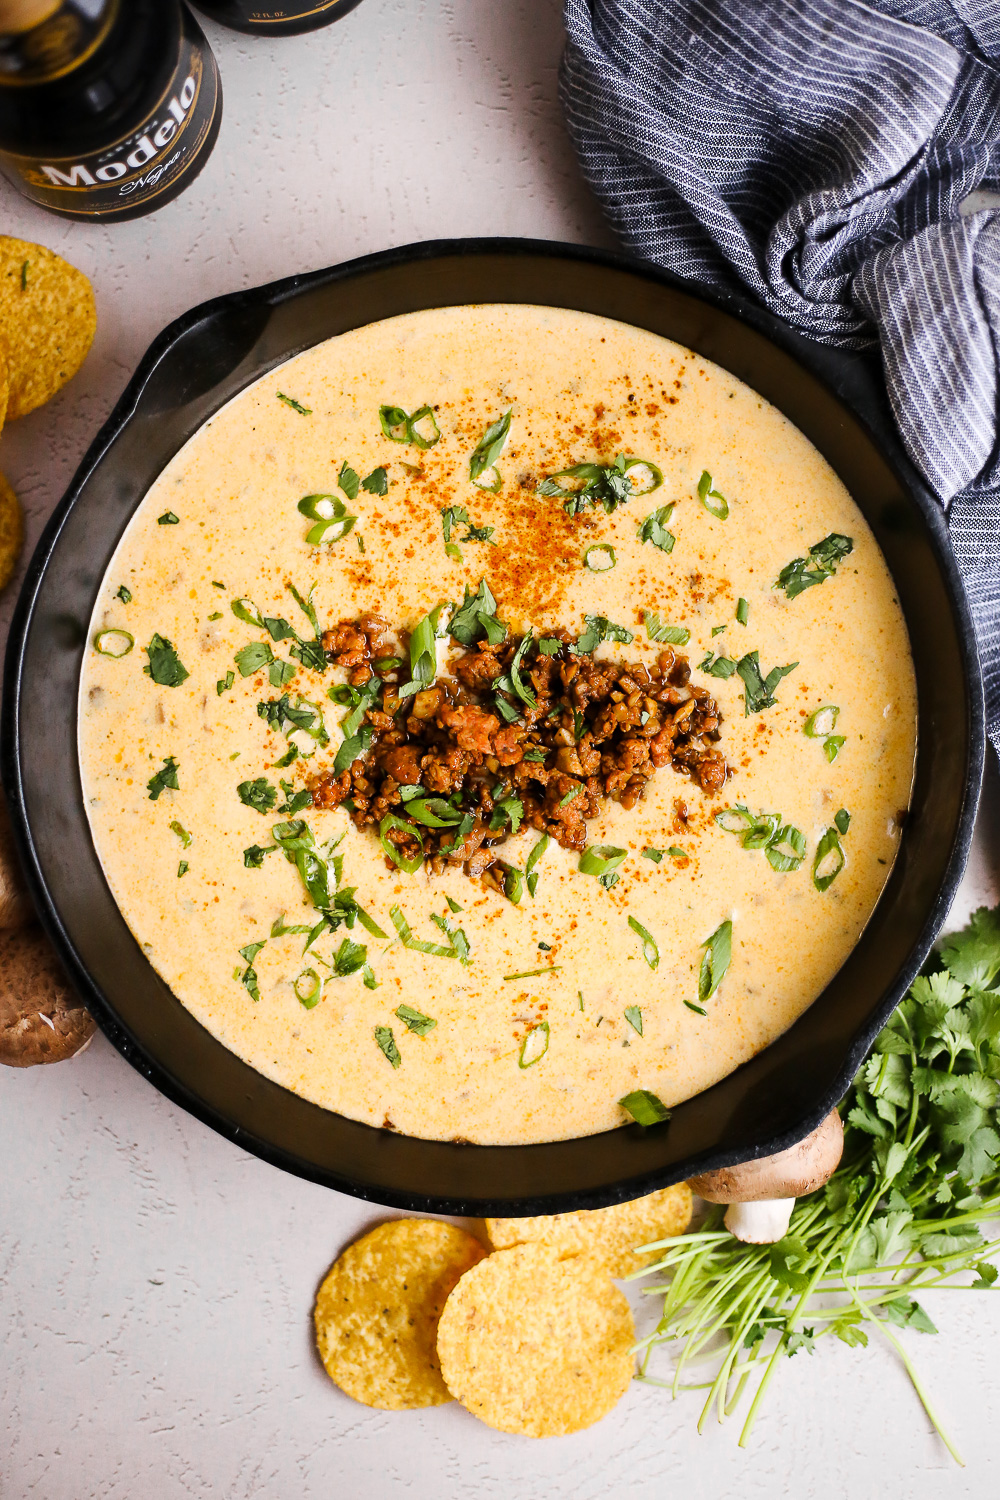 Overhead view of green chile queso in a black cast iron skillet, garnished with cilantro, green onions, chorizo, and mushrooms, served with tortilla chips and bottles of beer